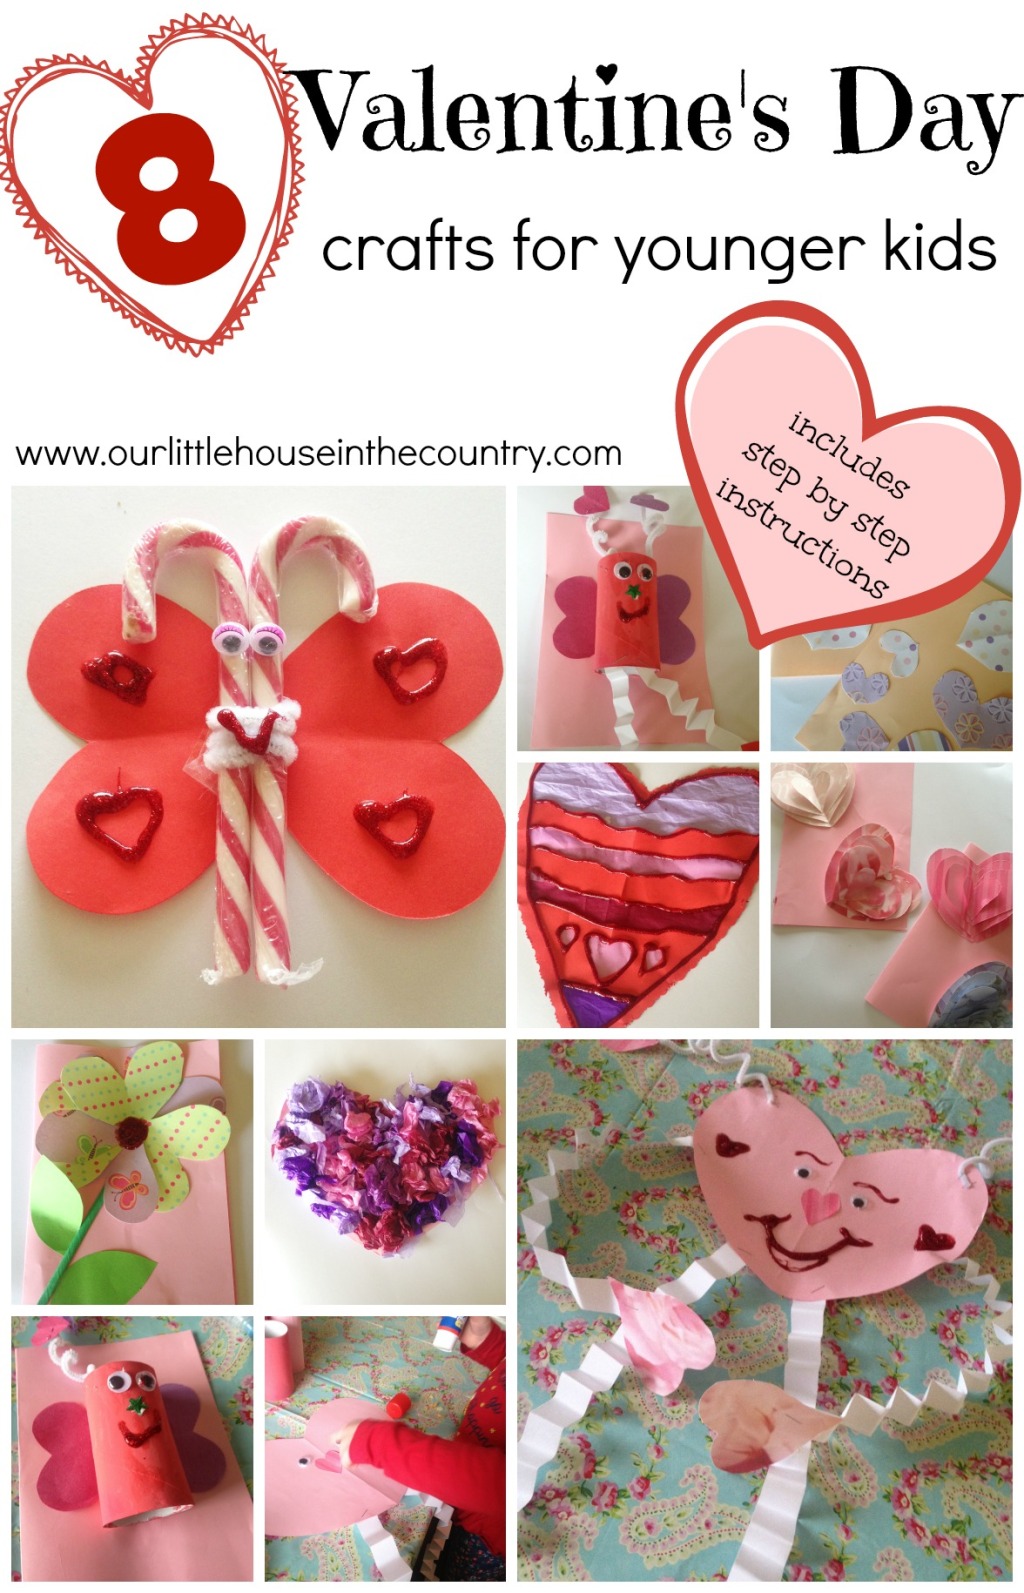 8 Valentine's Day Crafts for Younger Kids - includes step by step instructions - Our Little House in the Country